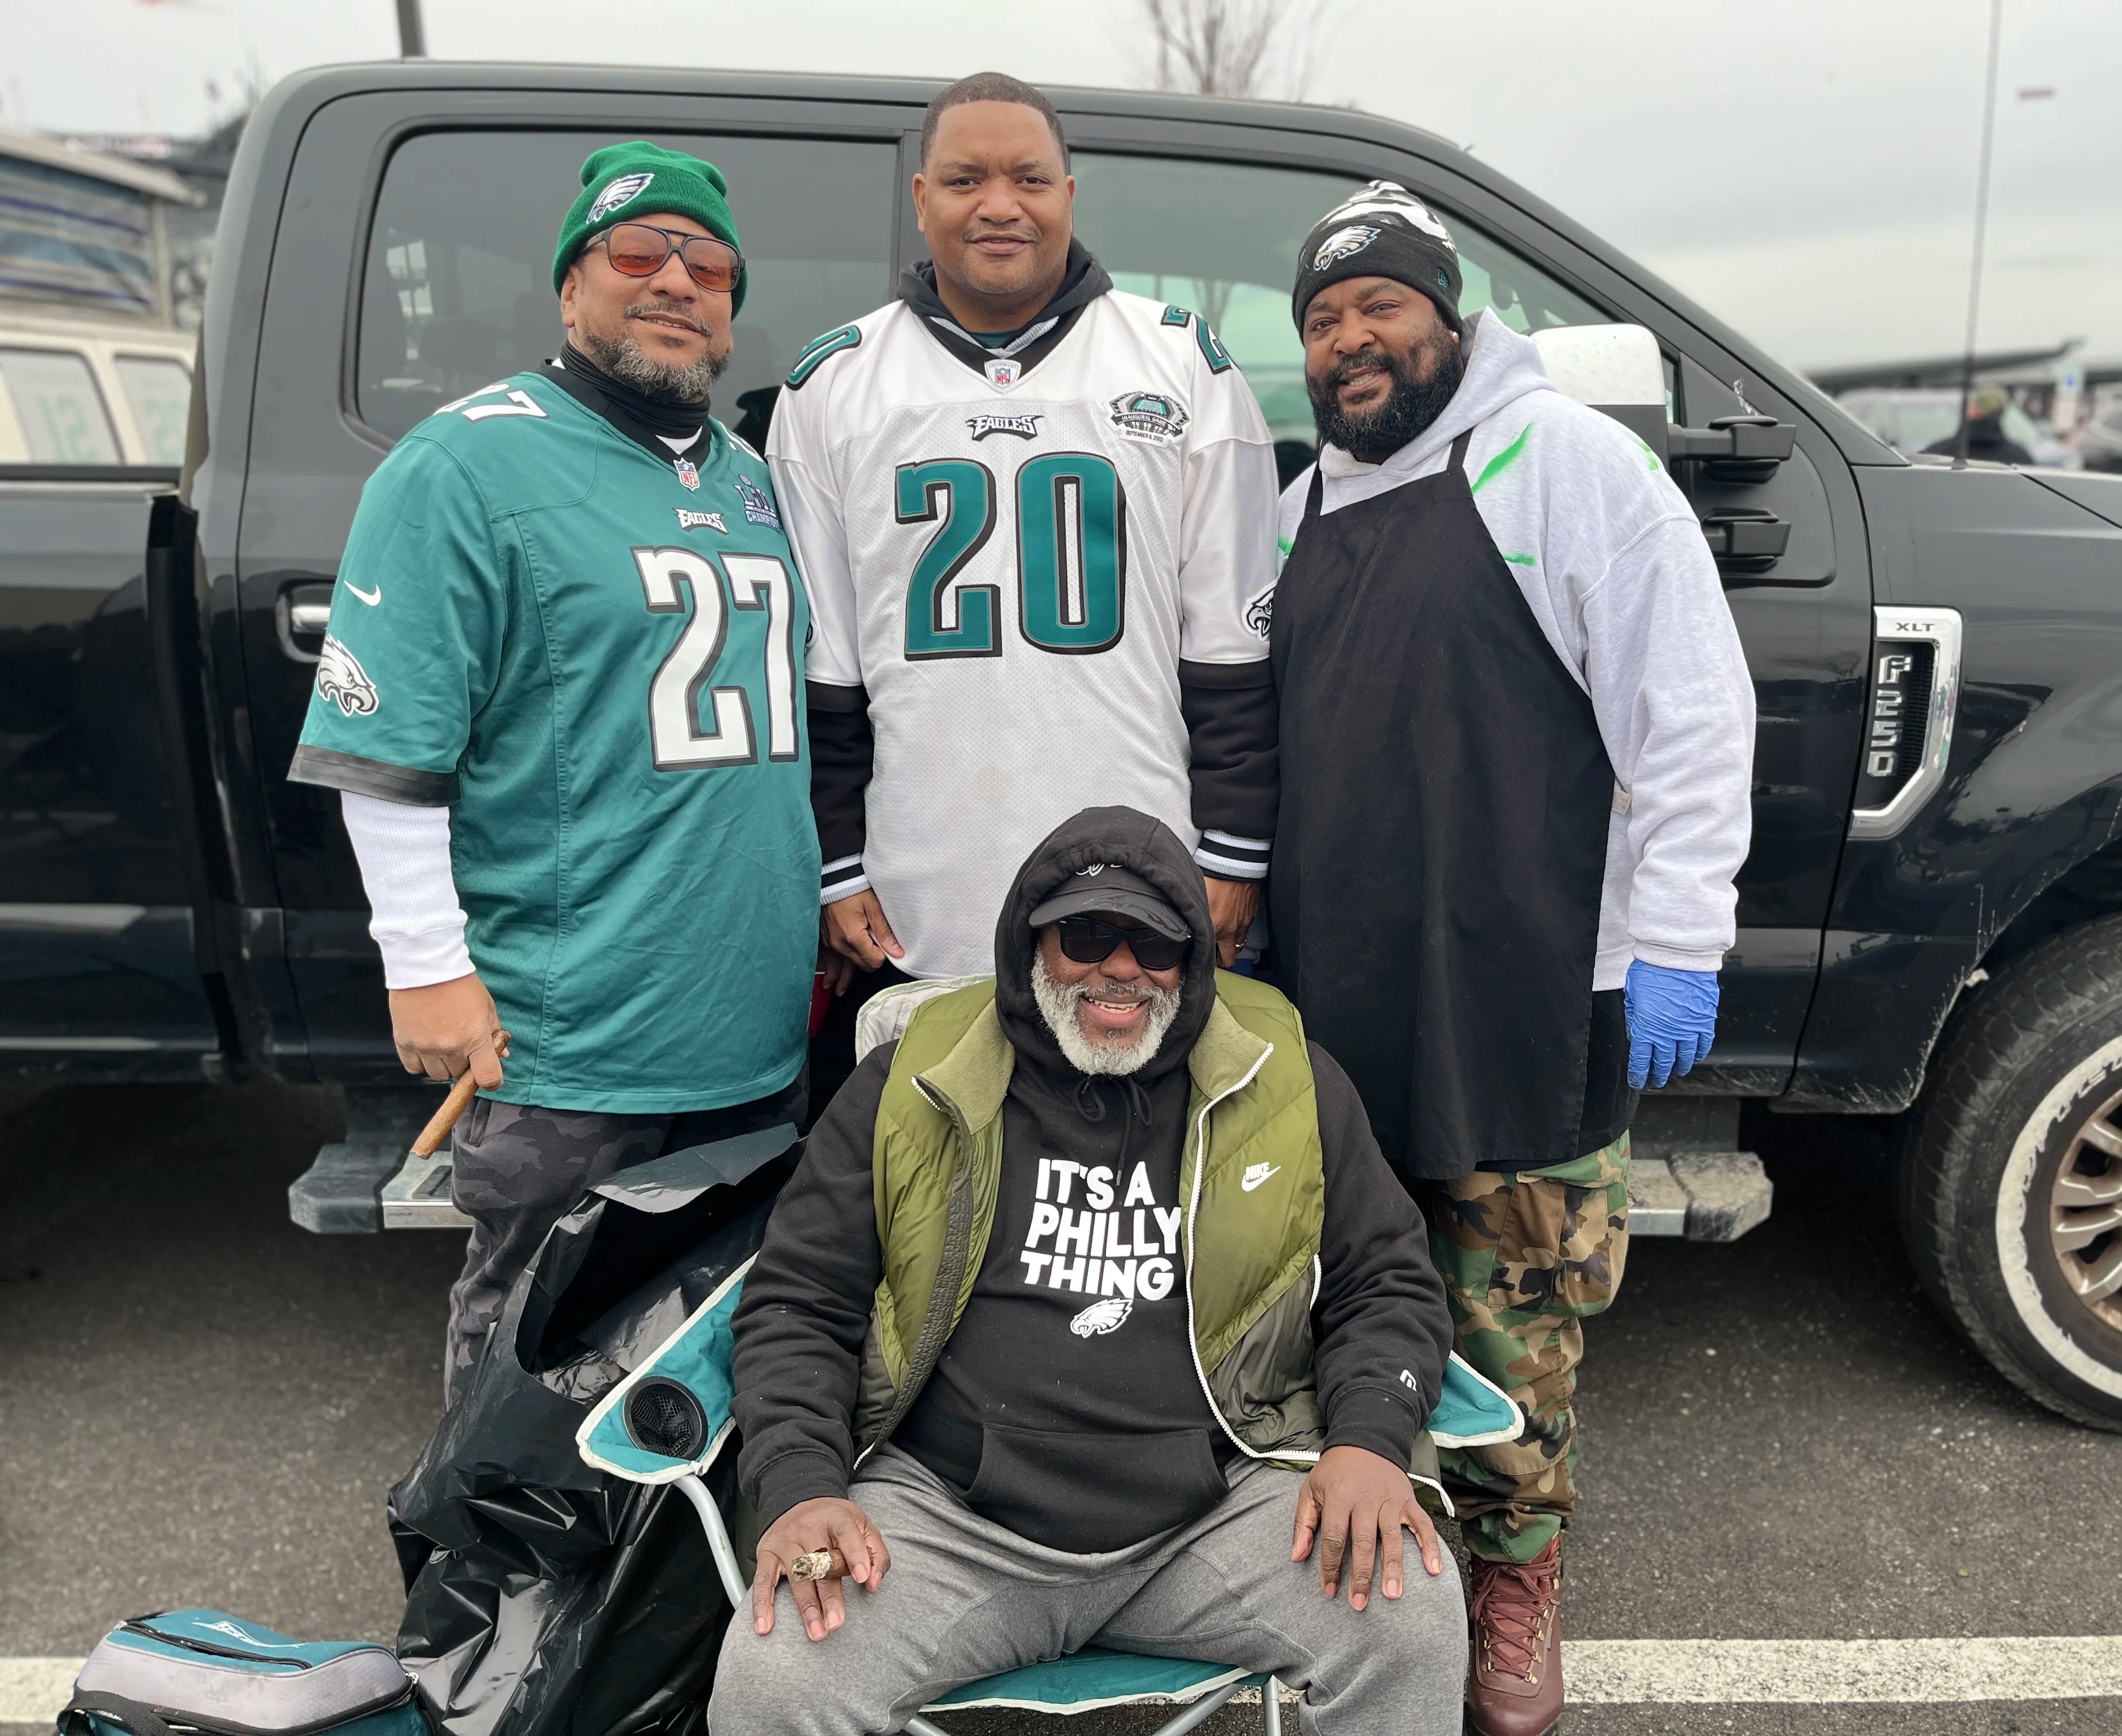 Atlantic City Mayor Marty Small saved Eagles fan's life at Lincoln  Financial Field